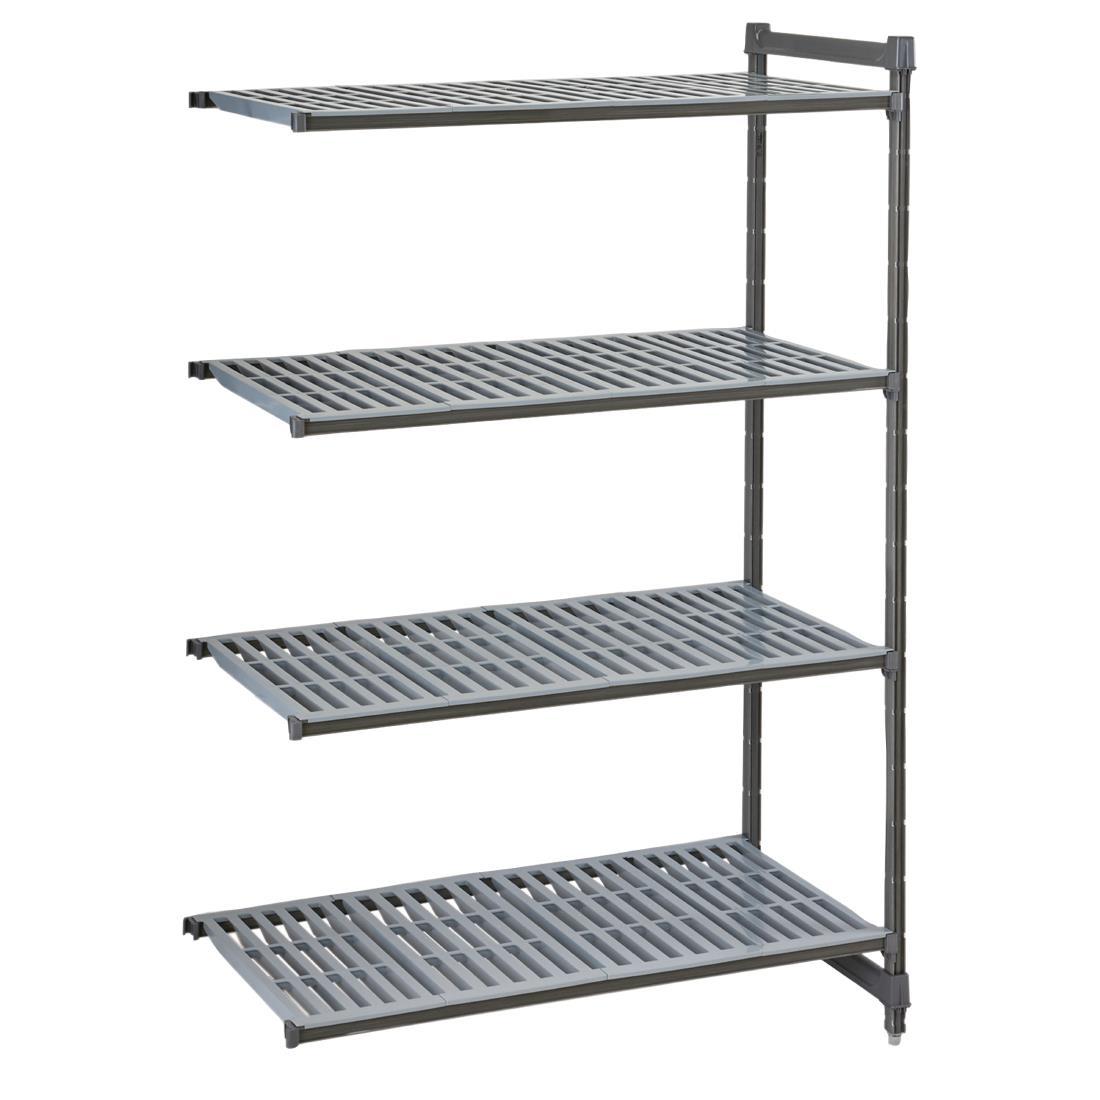 Cambro Camshelving Basics Plus Add-On Unit 4 Tier With Vented Shelves 1830H x 870W x 460D mm